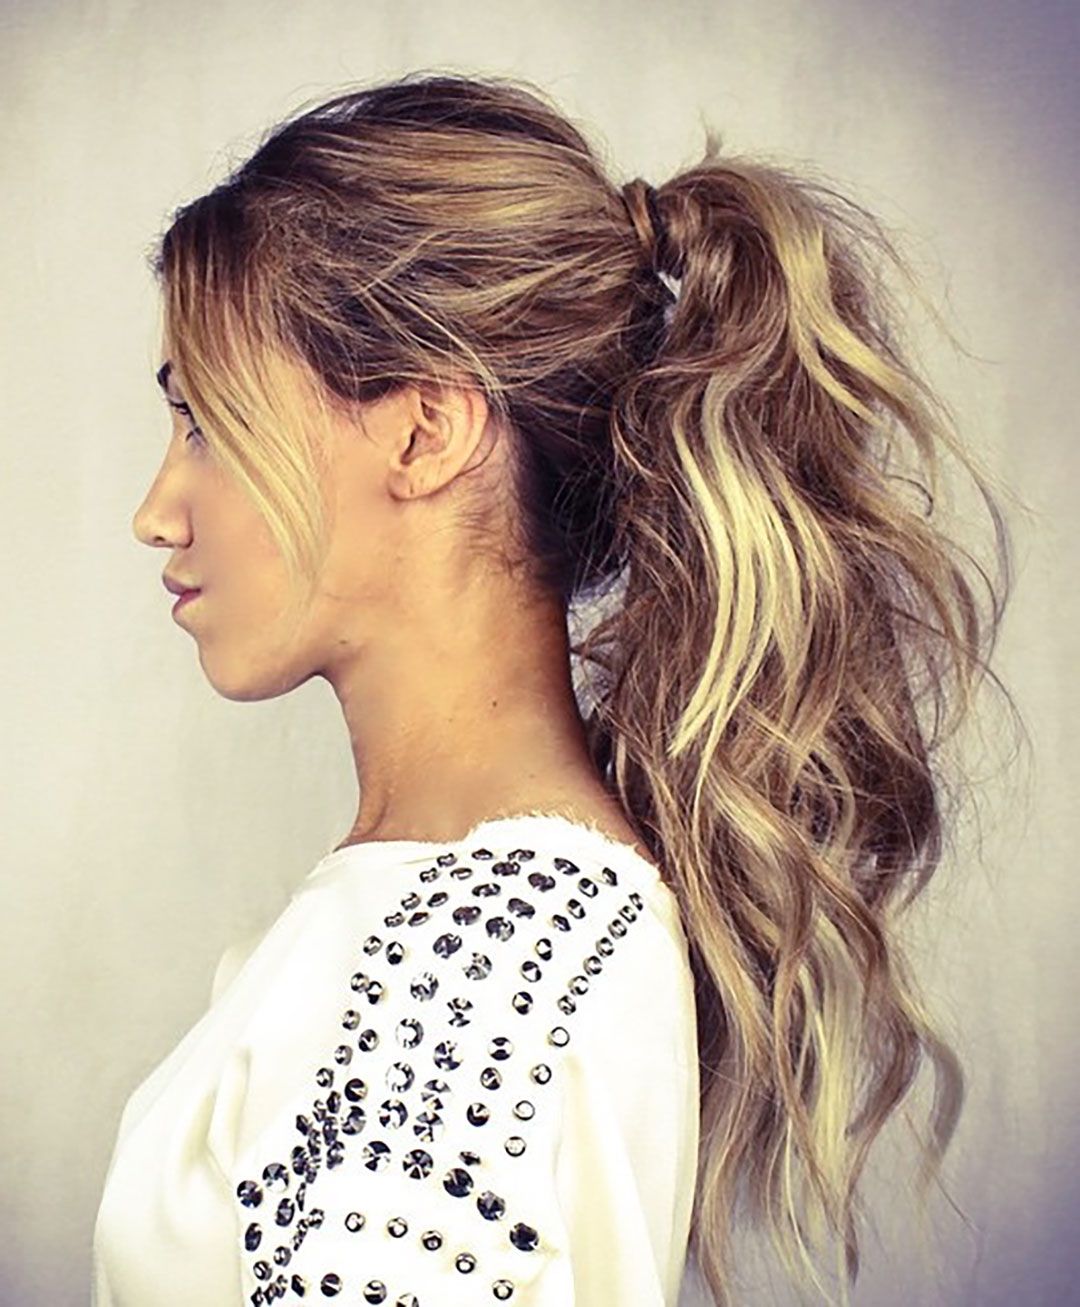 Ponytail Hairstyles - 5 Easy Ponytail Looks for the Work Week